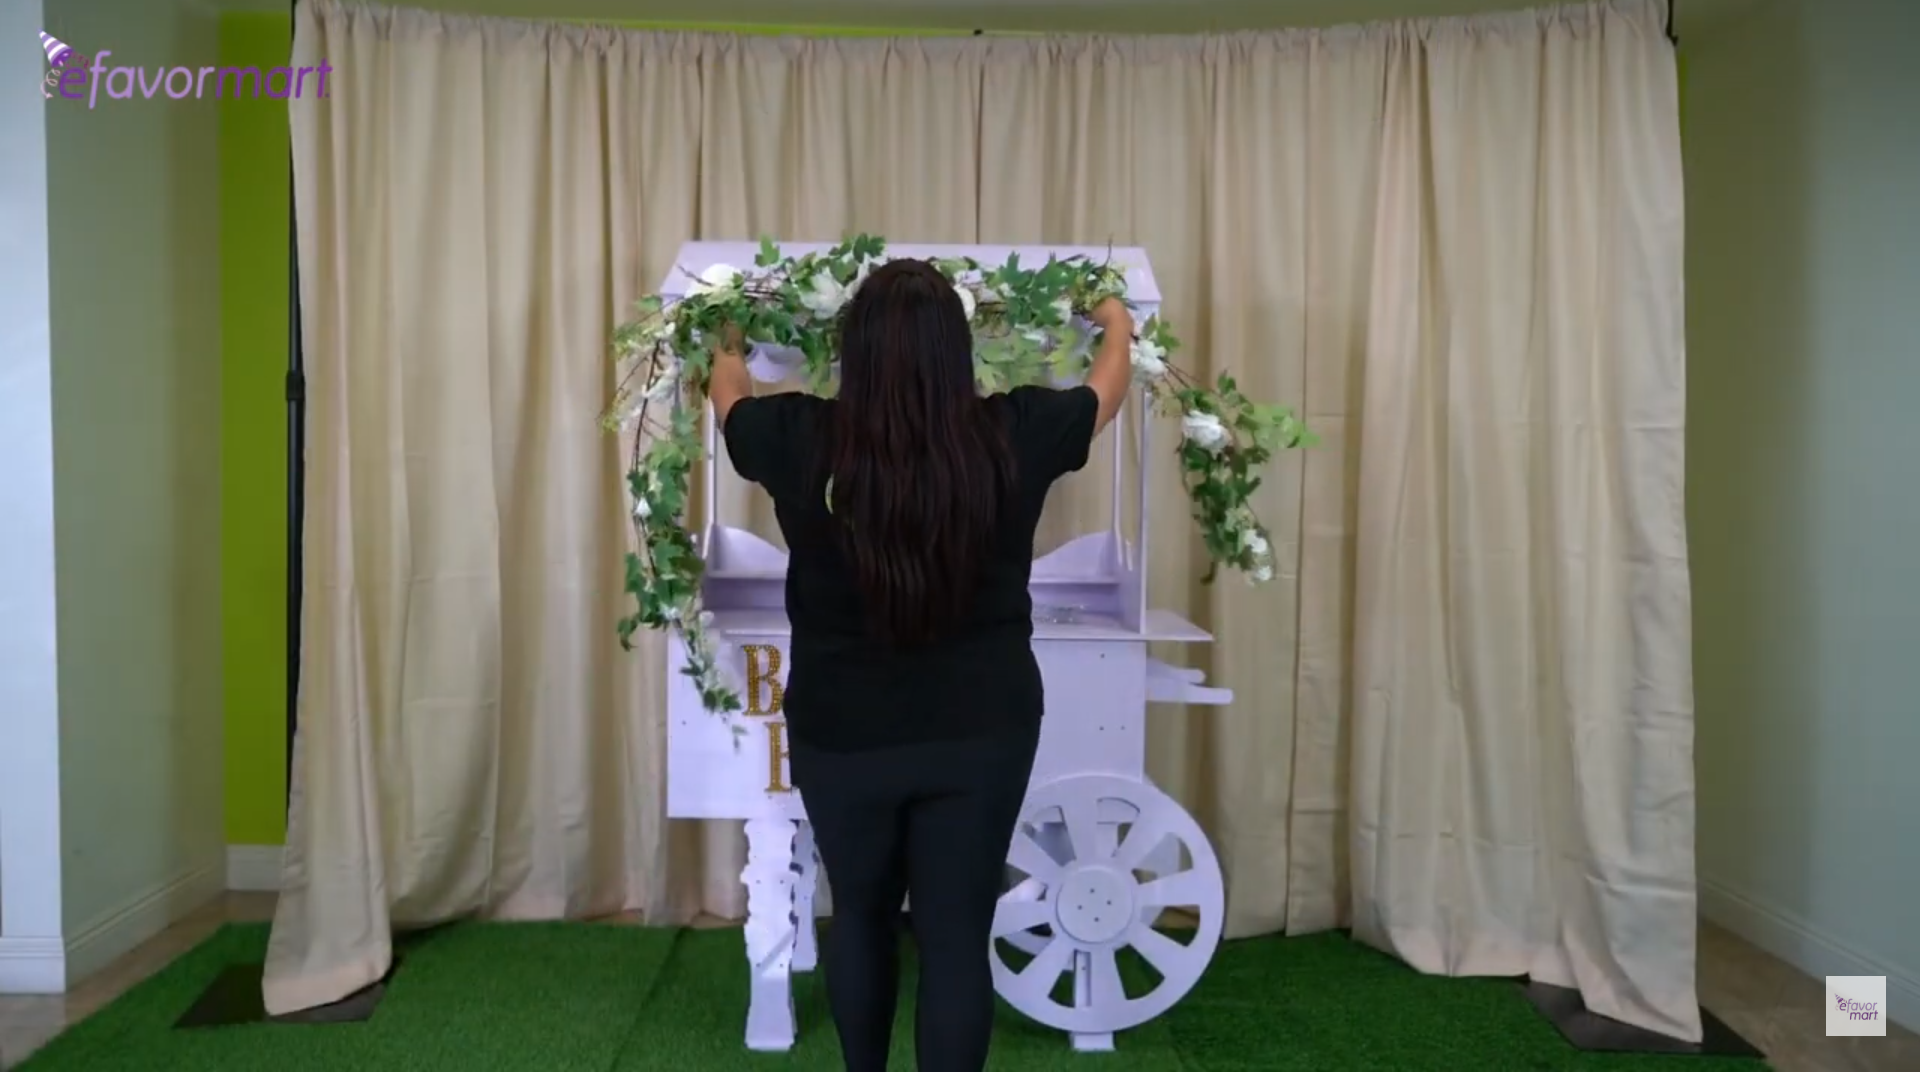 Image of a woman decorating a cart with greenery as Mother's Day decor.